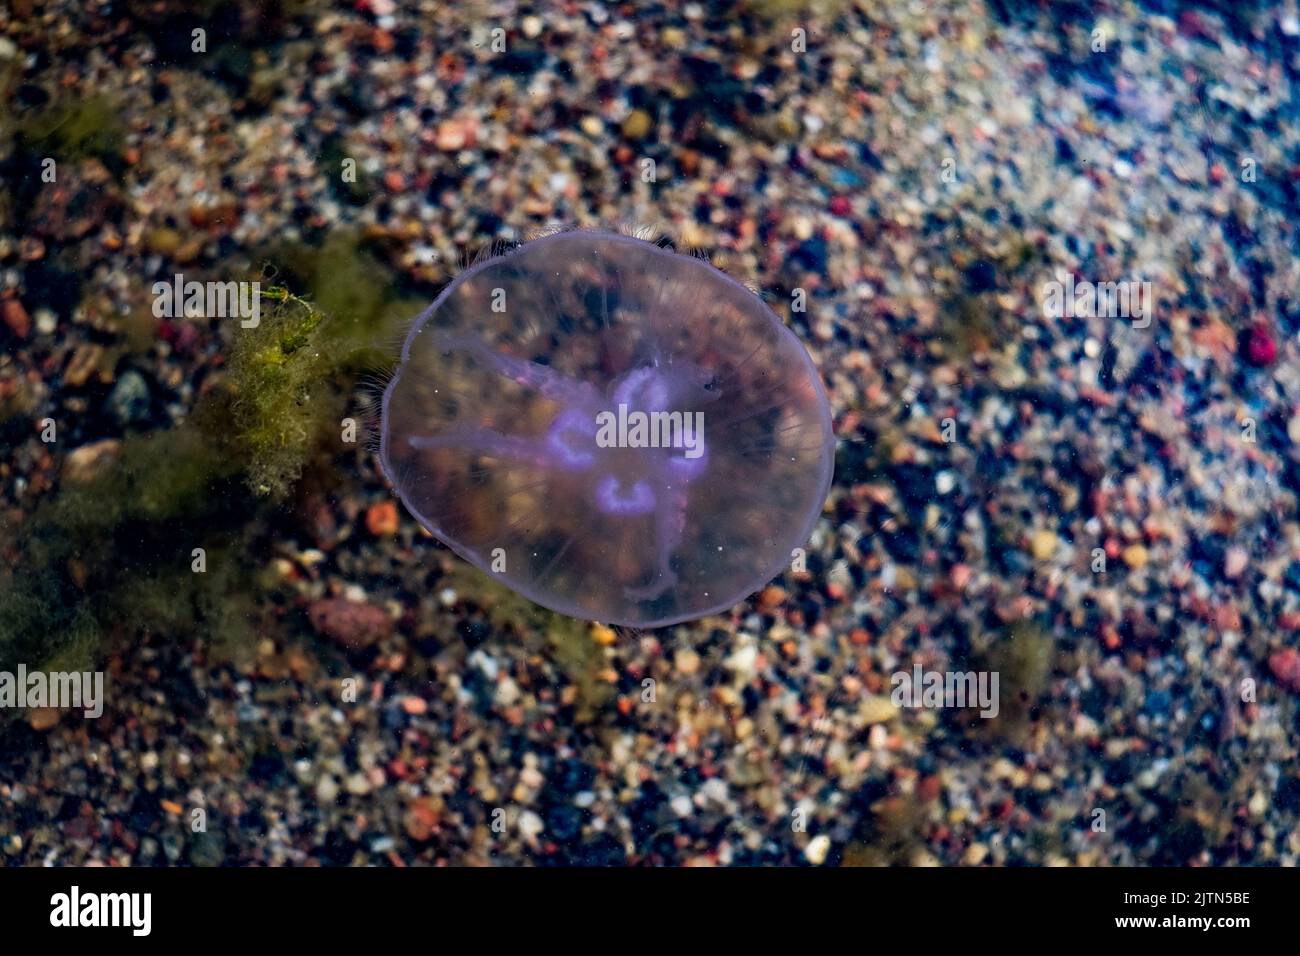 Jellyfish swimming in Baltic Sea during hot summer day. Shot through water. Stock Photo